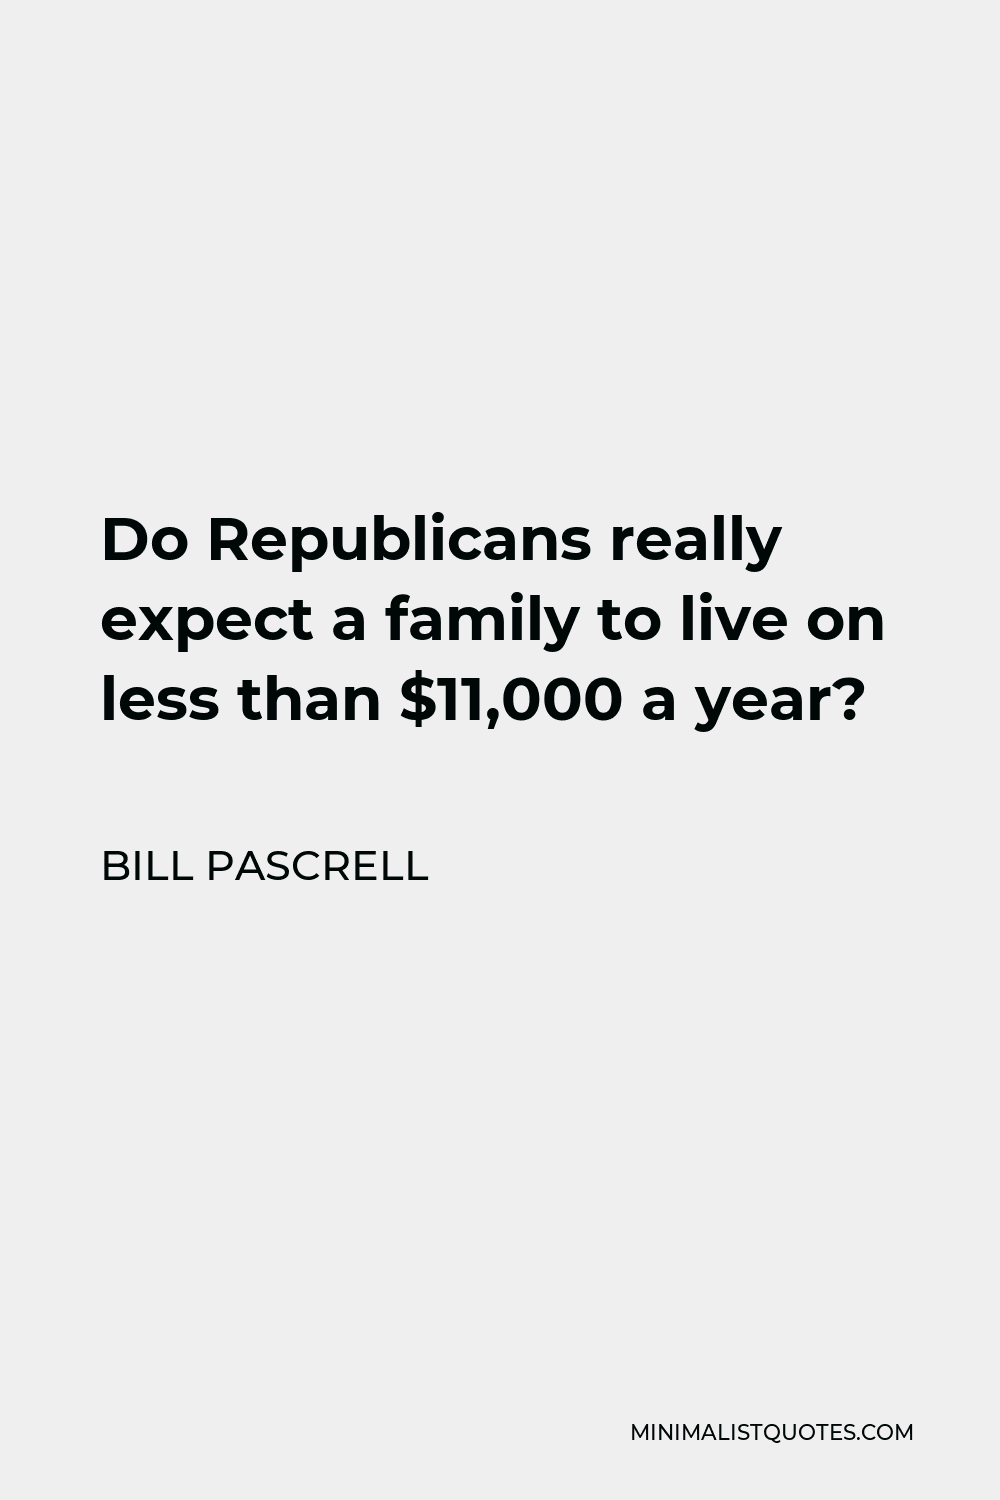 Bill Pascrell Quote - Do Republicans really expect a family to live on less than $11,000 a year?